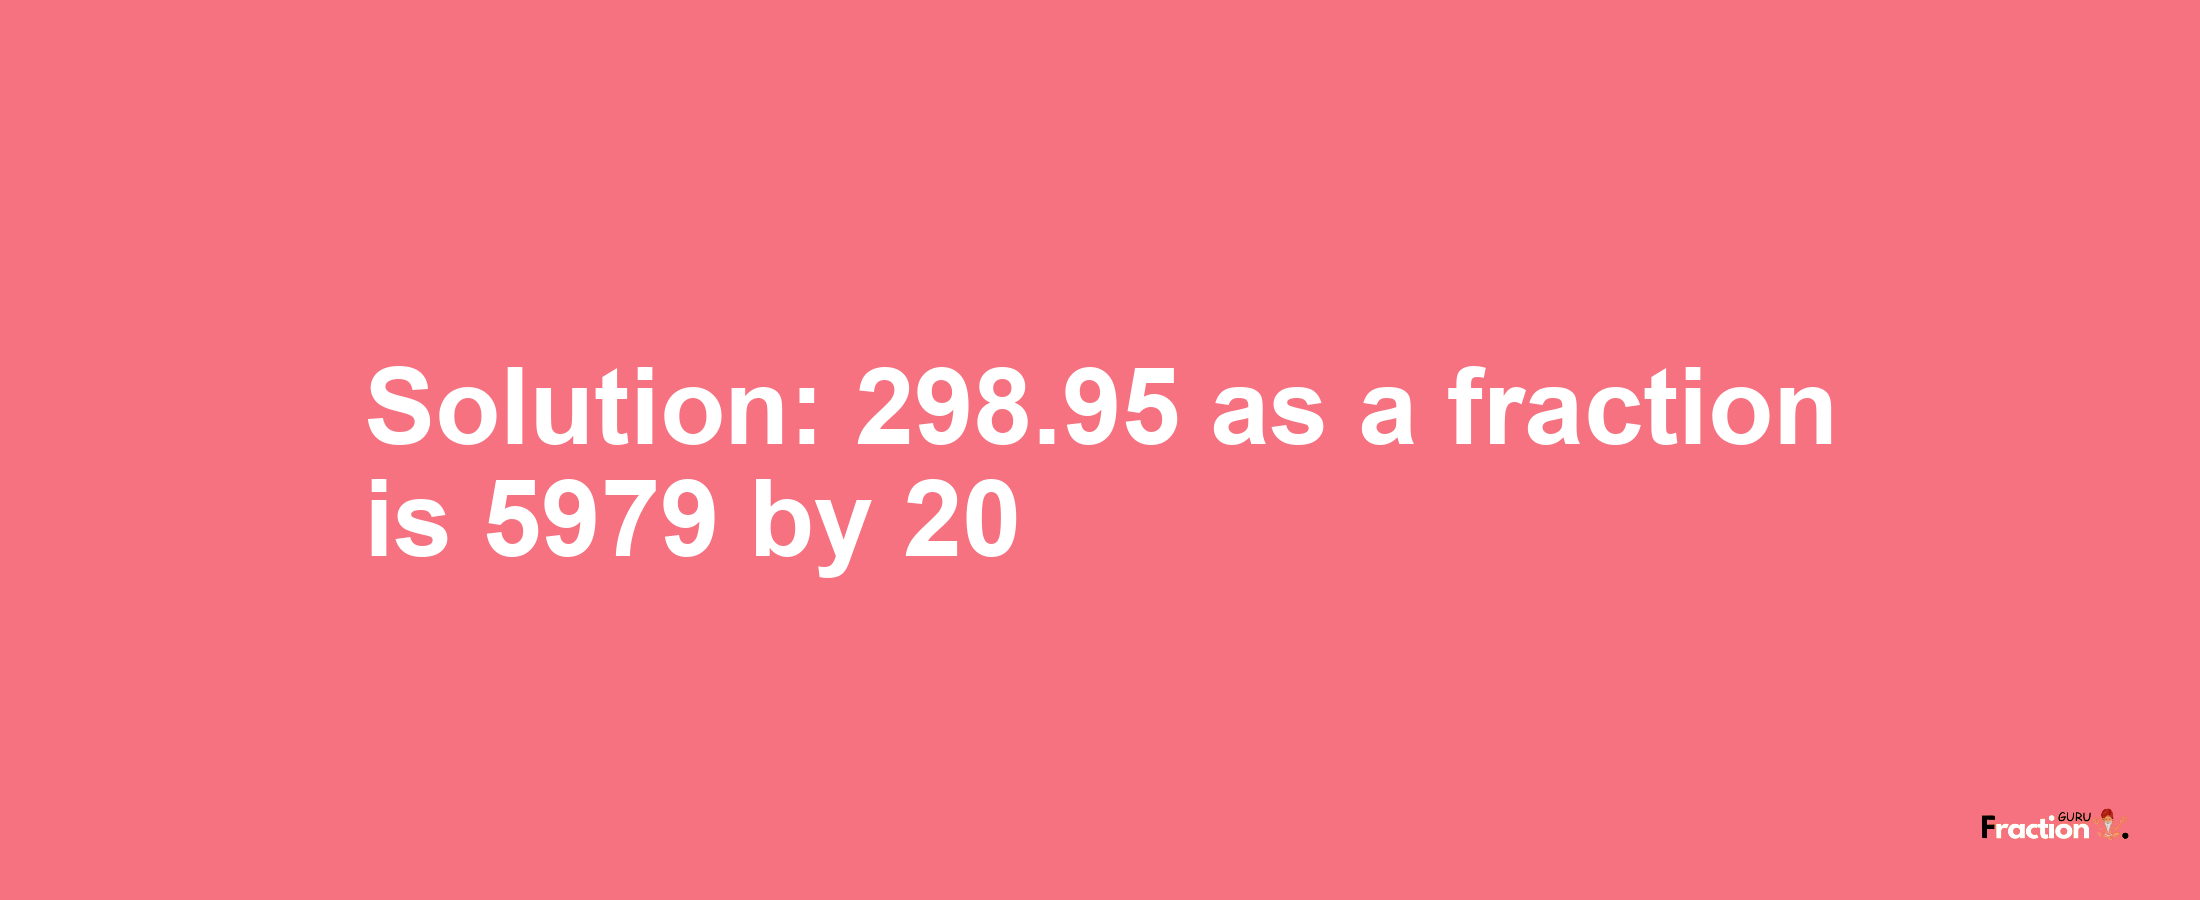 Solution:298.95 as a fraction is 5979/20